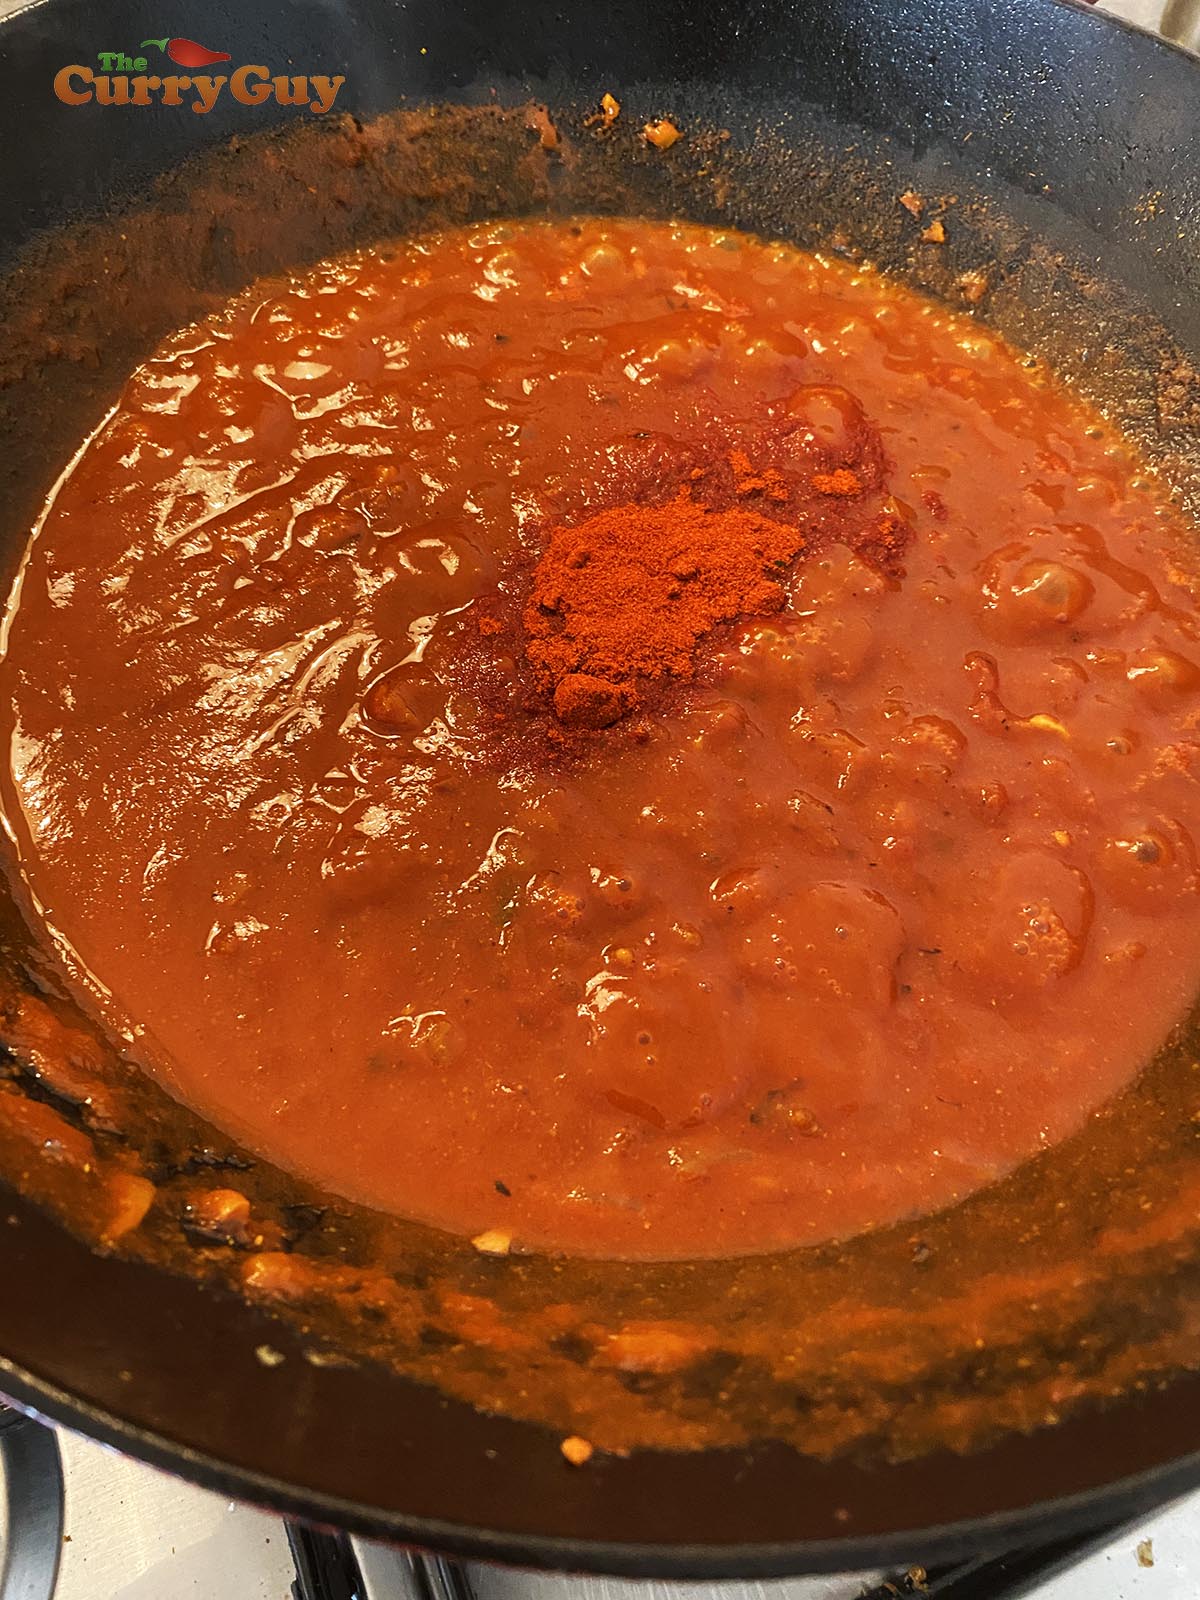 Adding tomatoes and water to sauce.